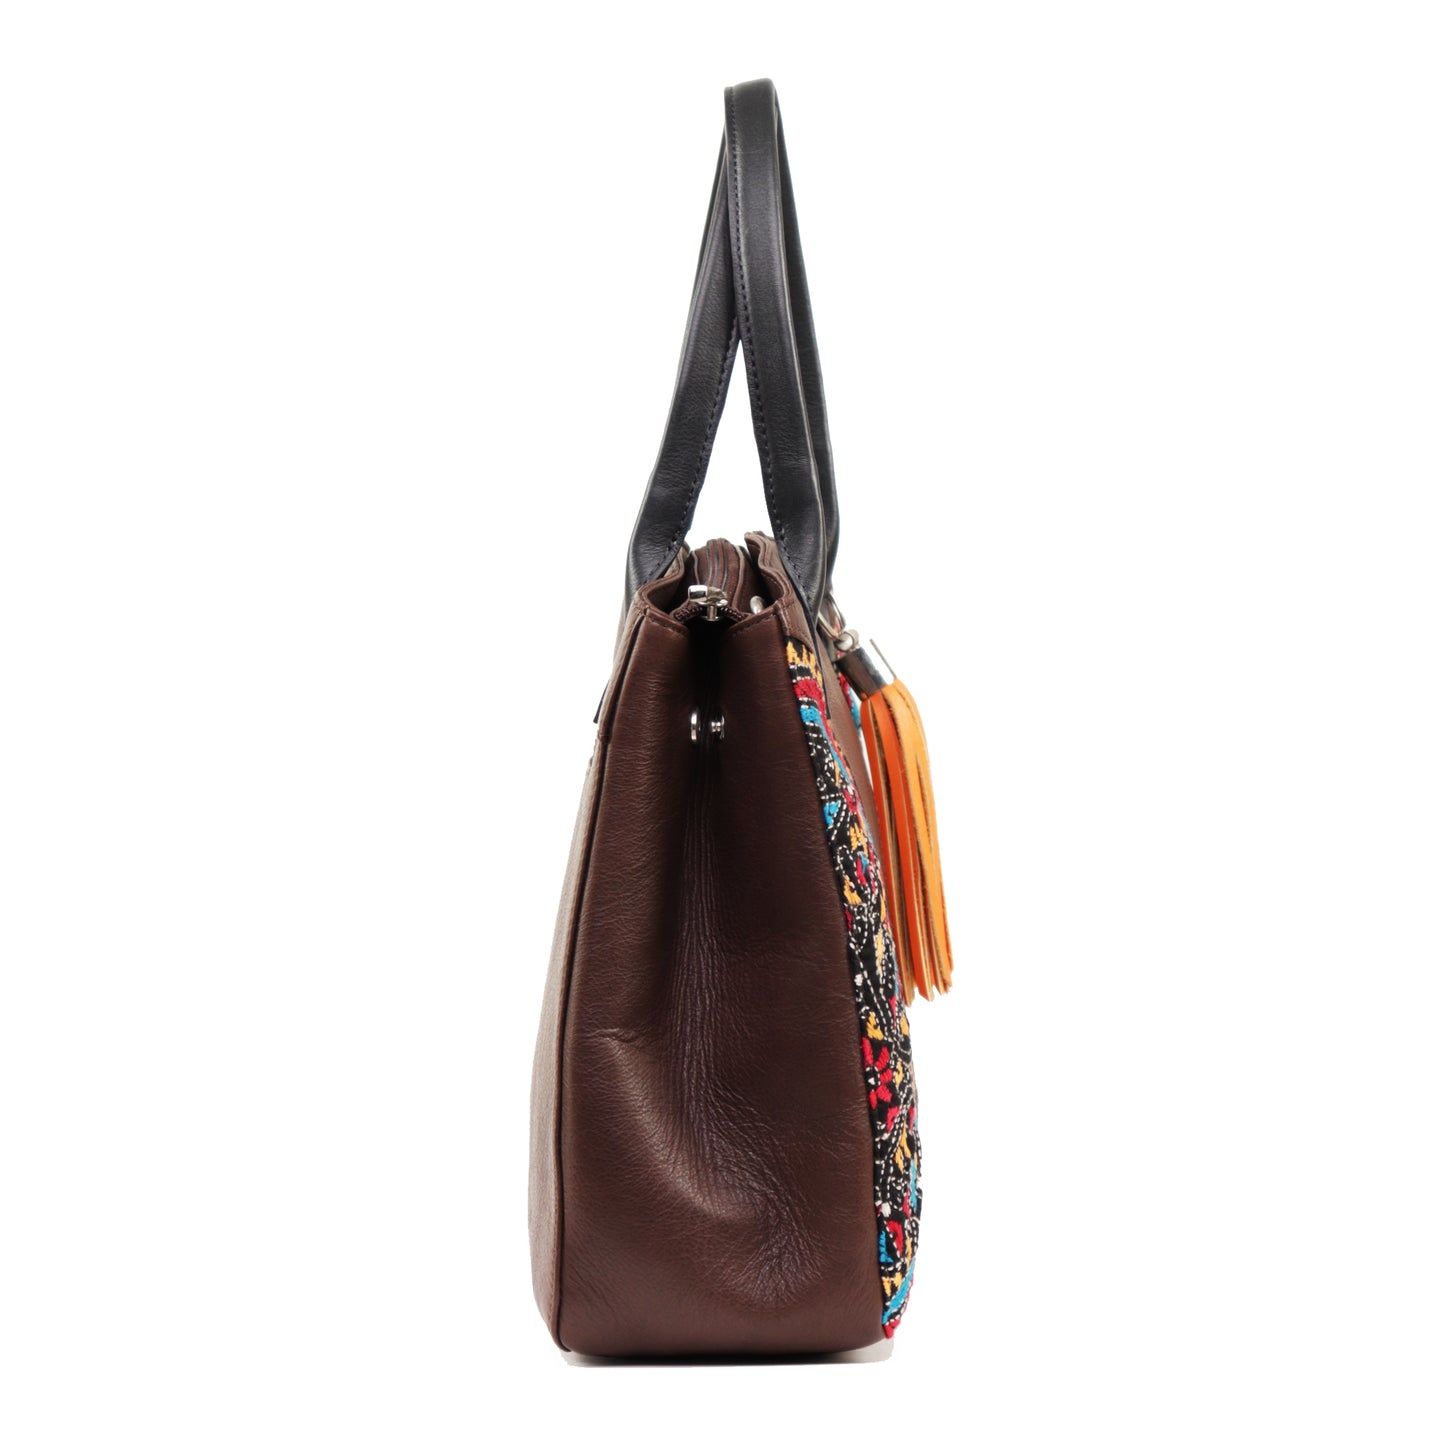 Genuine Leather-Kantha Handcrafted Tote Bag Women (Brown, Black)